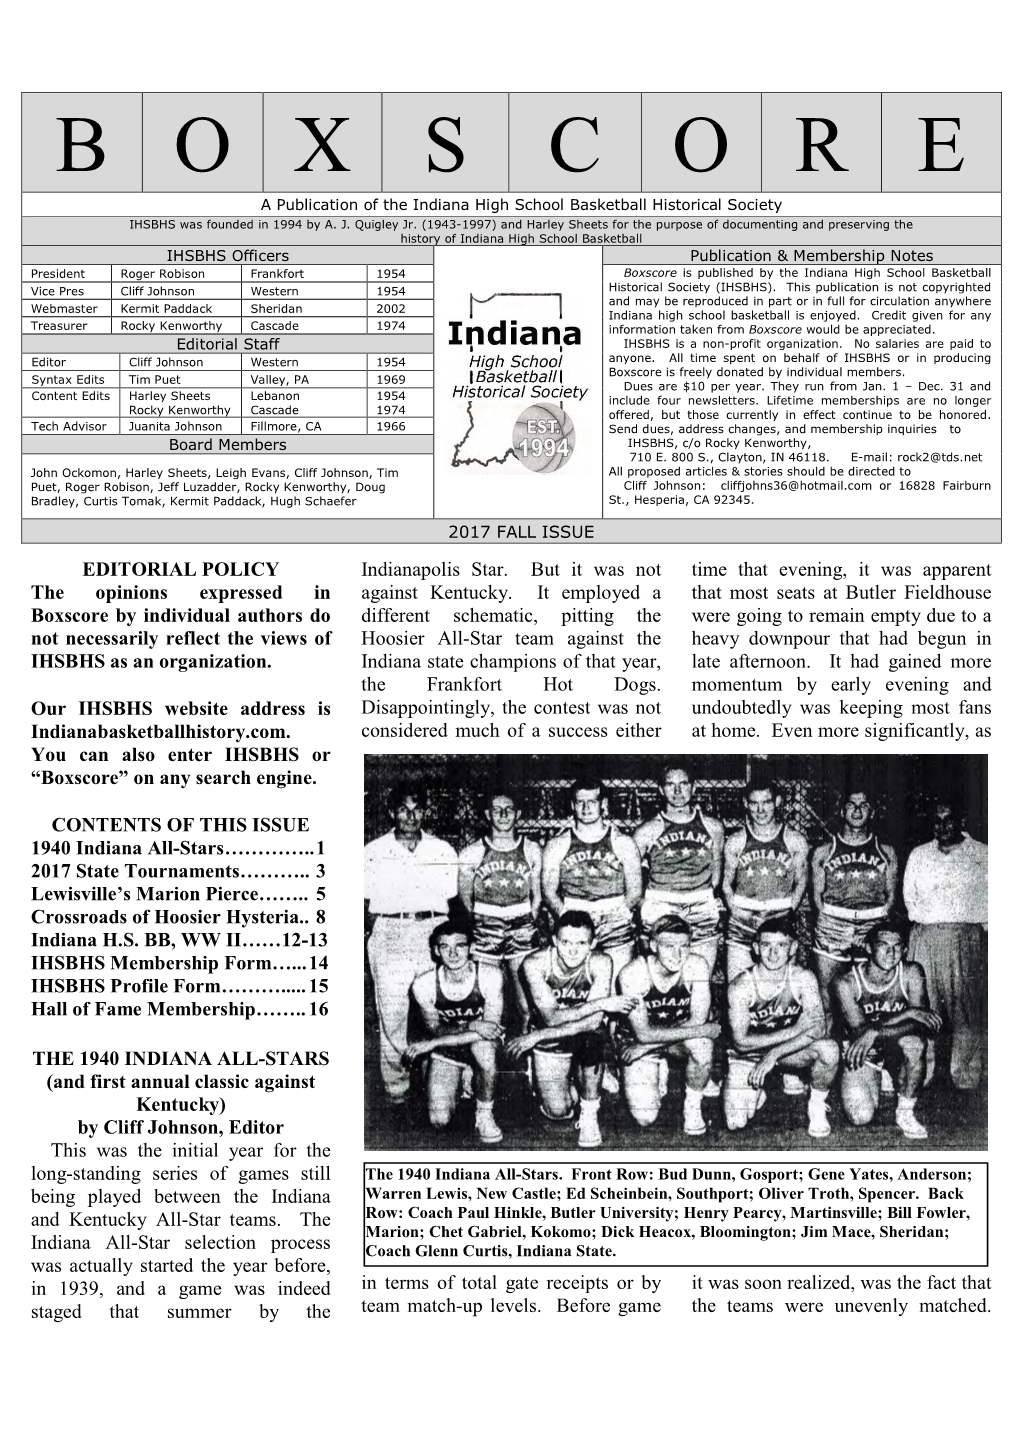 B O X S C O R E a Publication of the Indiana High School Basketball Historical Society IHSBHS Was Founded in 1994 by A